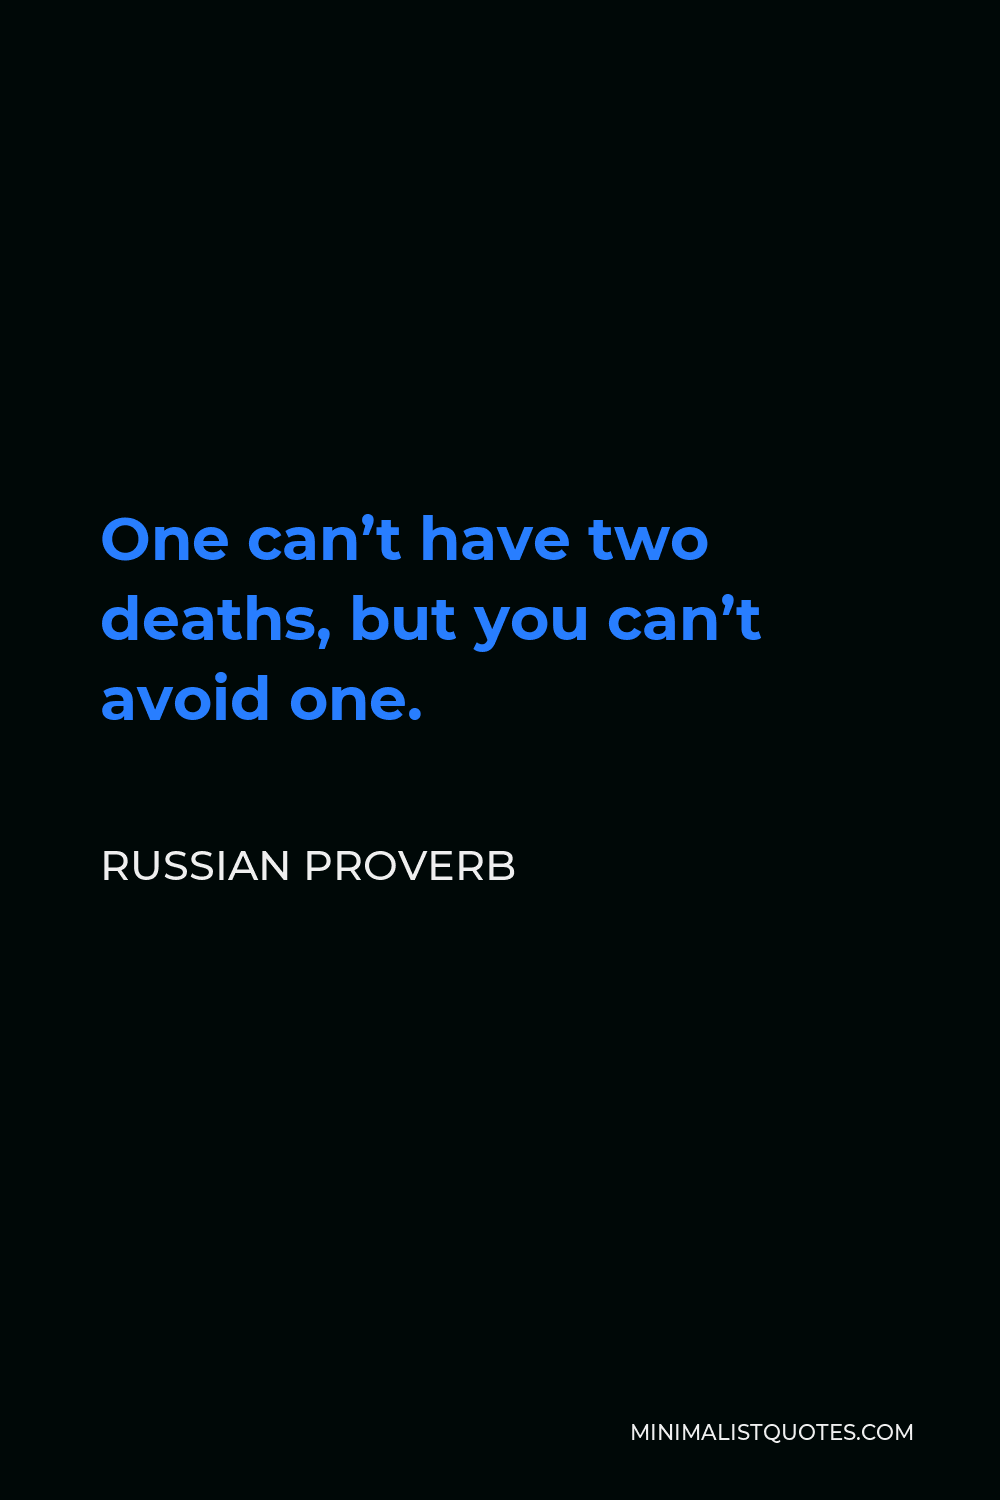 Russian Proverb Quote - One can’t have two deaths, but you can’t avoid one.